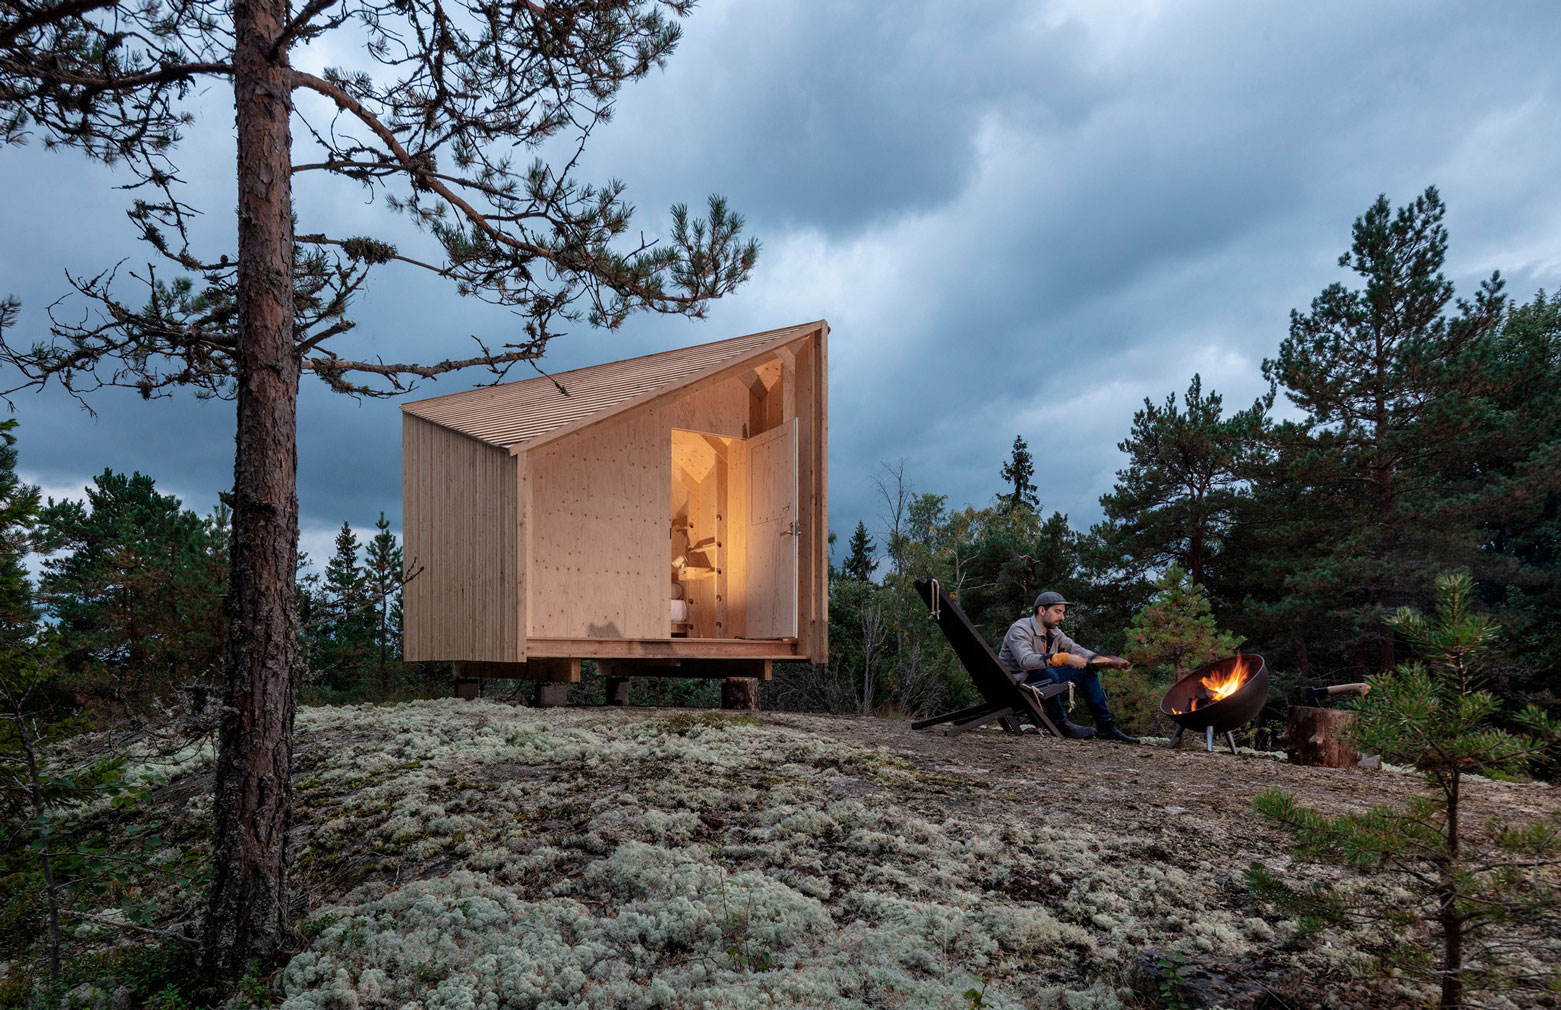 The offgrid cabin is designed for connecting with nature